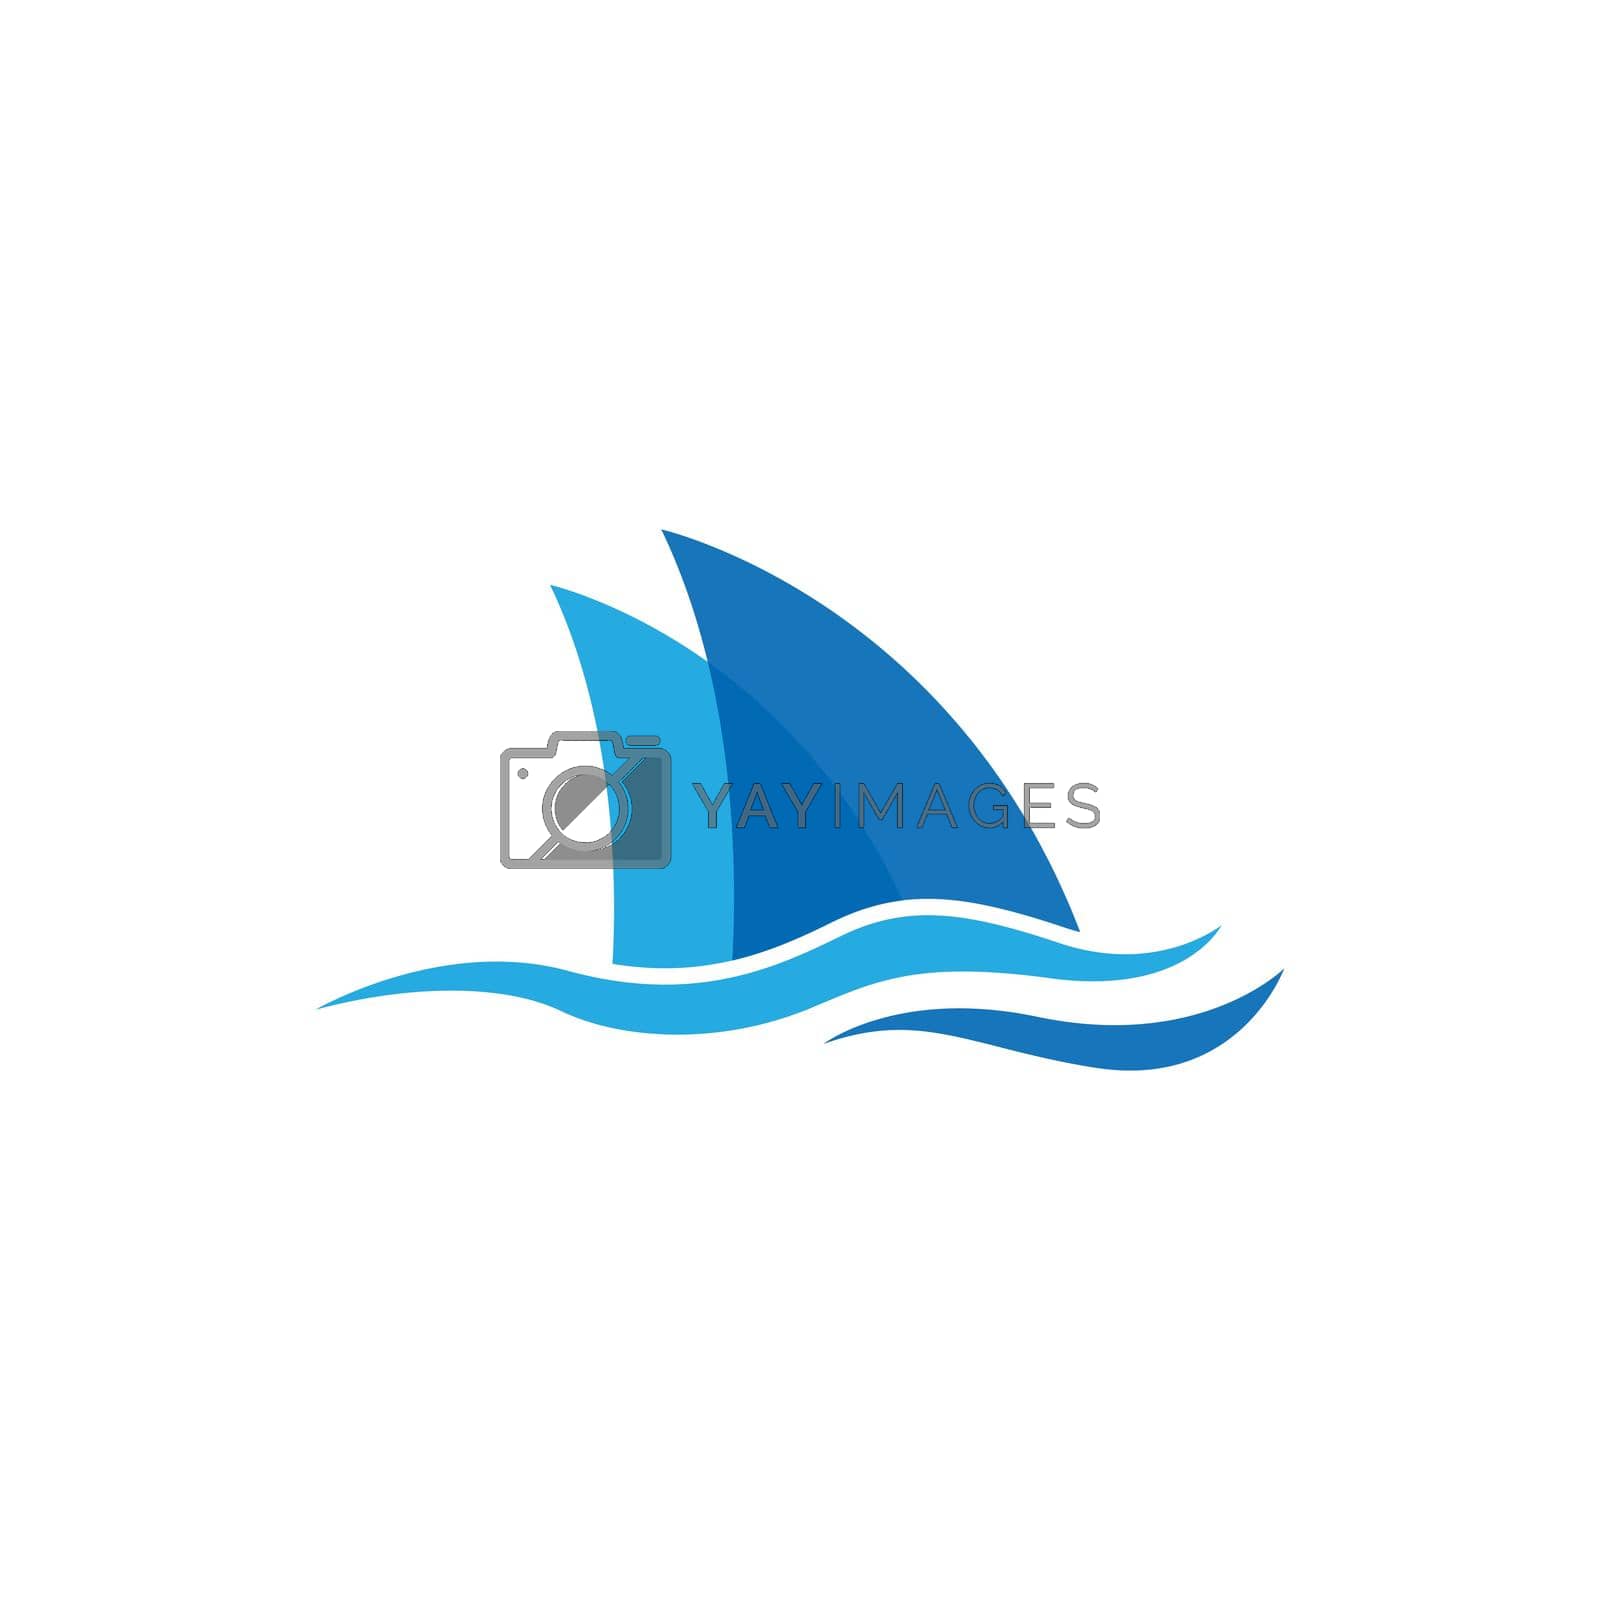 Royalty free image of Cruise ship logo images by Attades19